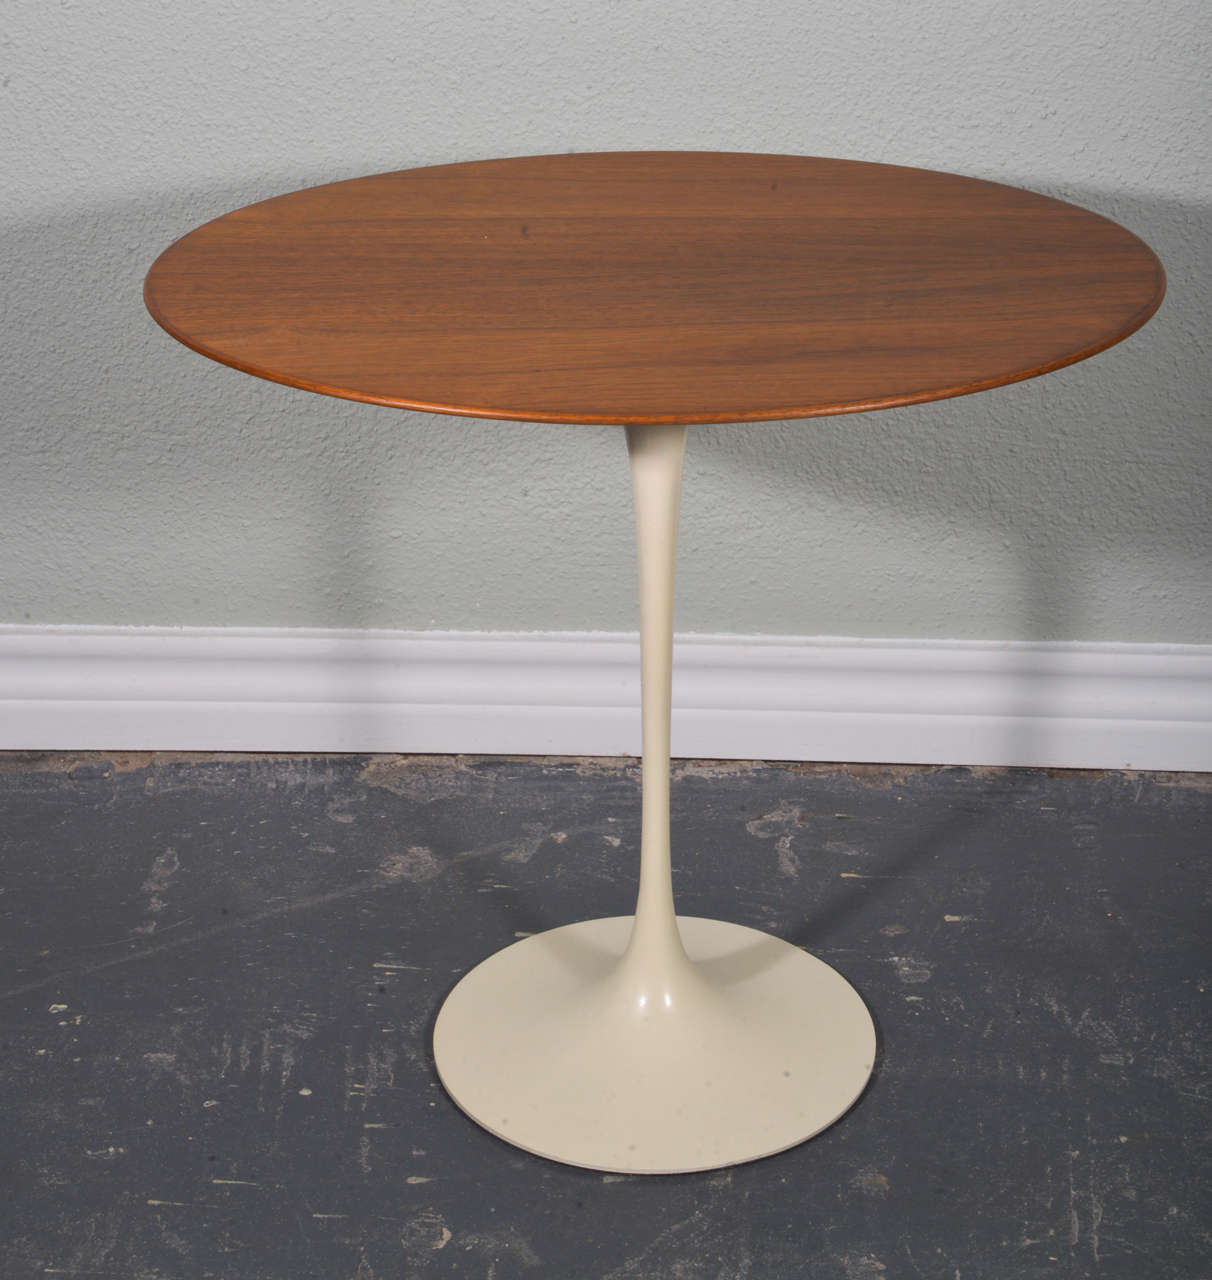 A vintage oval tulip table in Rosewood. Designed by Eero Saarinen and made by Knoll.